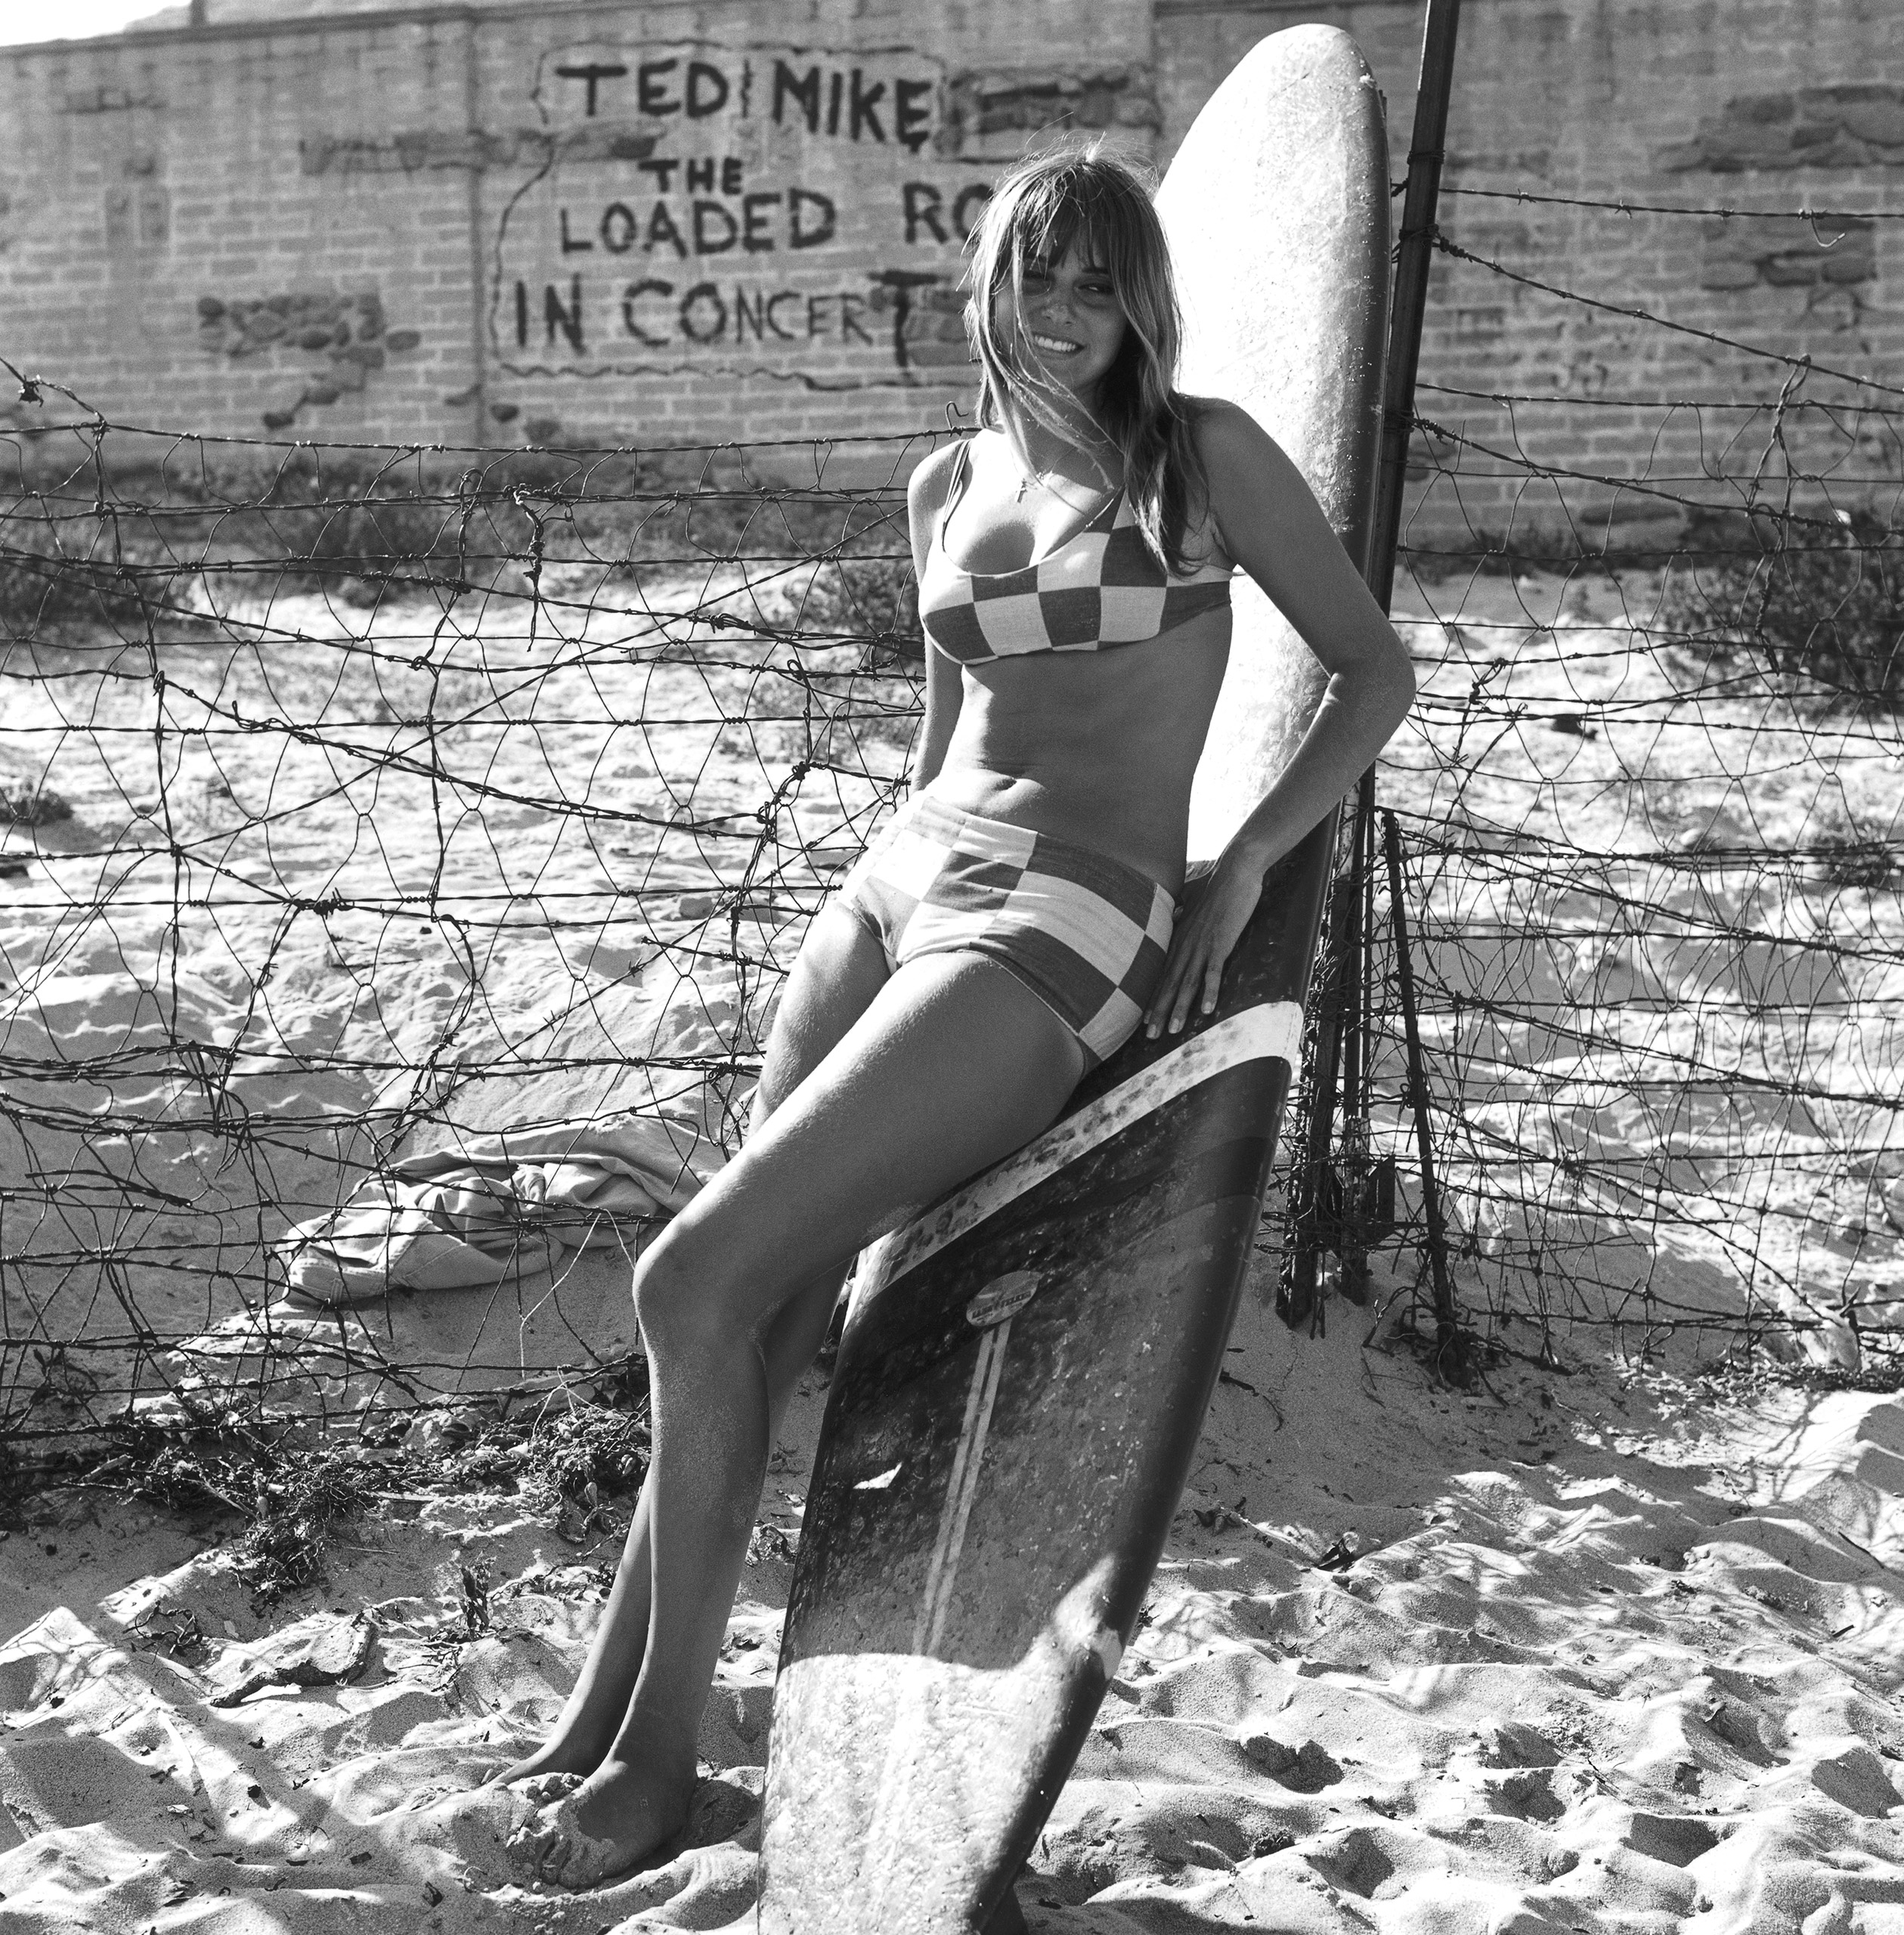 A woman in a checkered bikini leaning on a surf board Circa 1967 in Los Angeles.